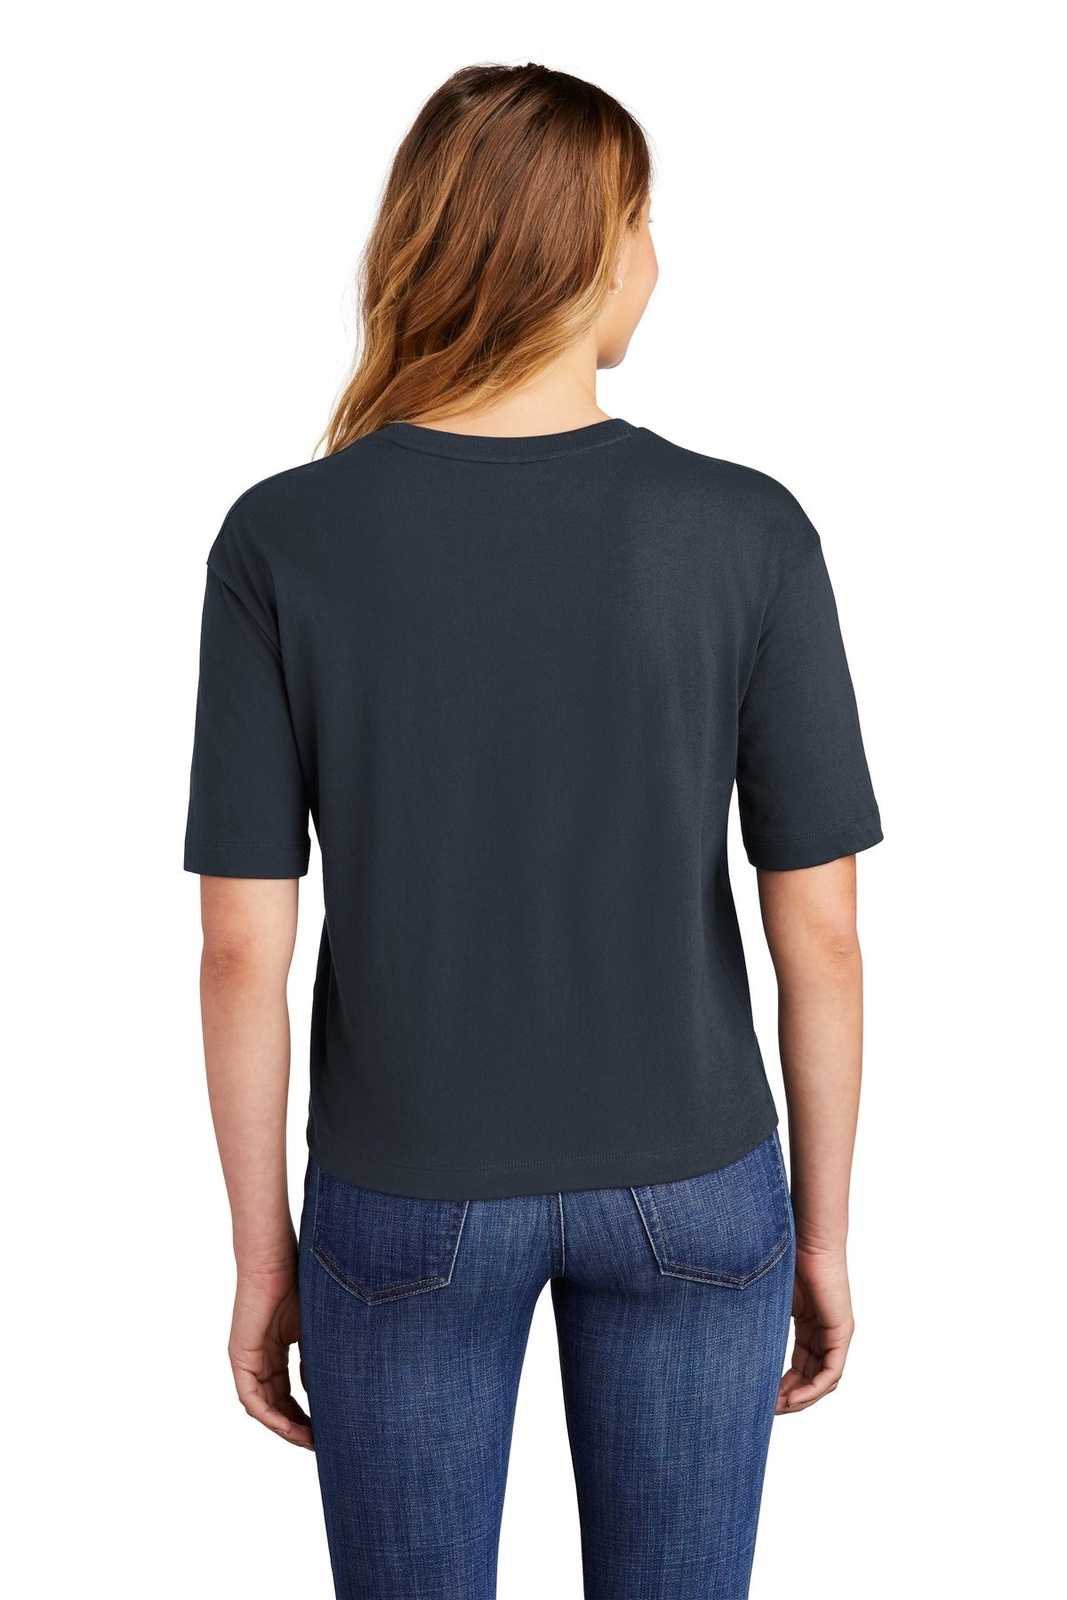 District DT6402 Women's V.I.T. Boxy Tee - New Navy - HIT a Double - 1